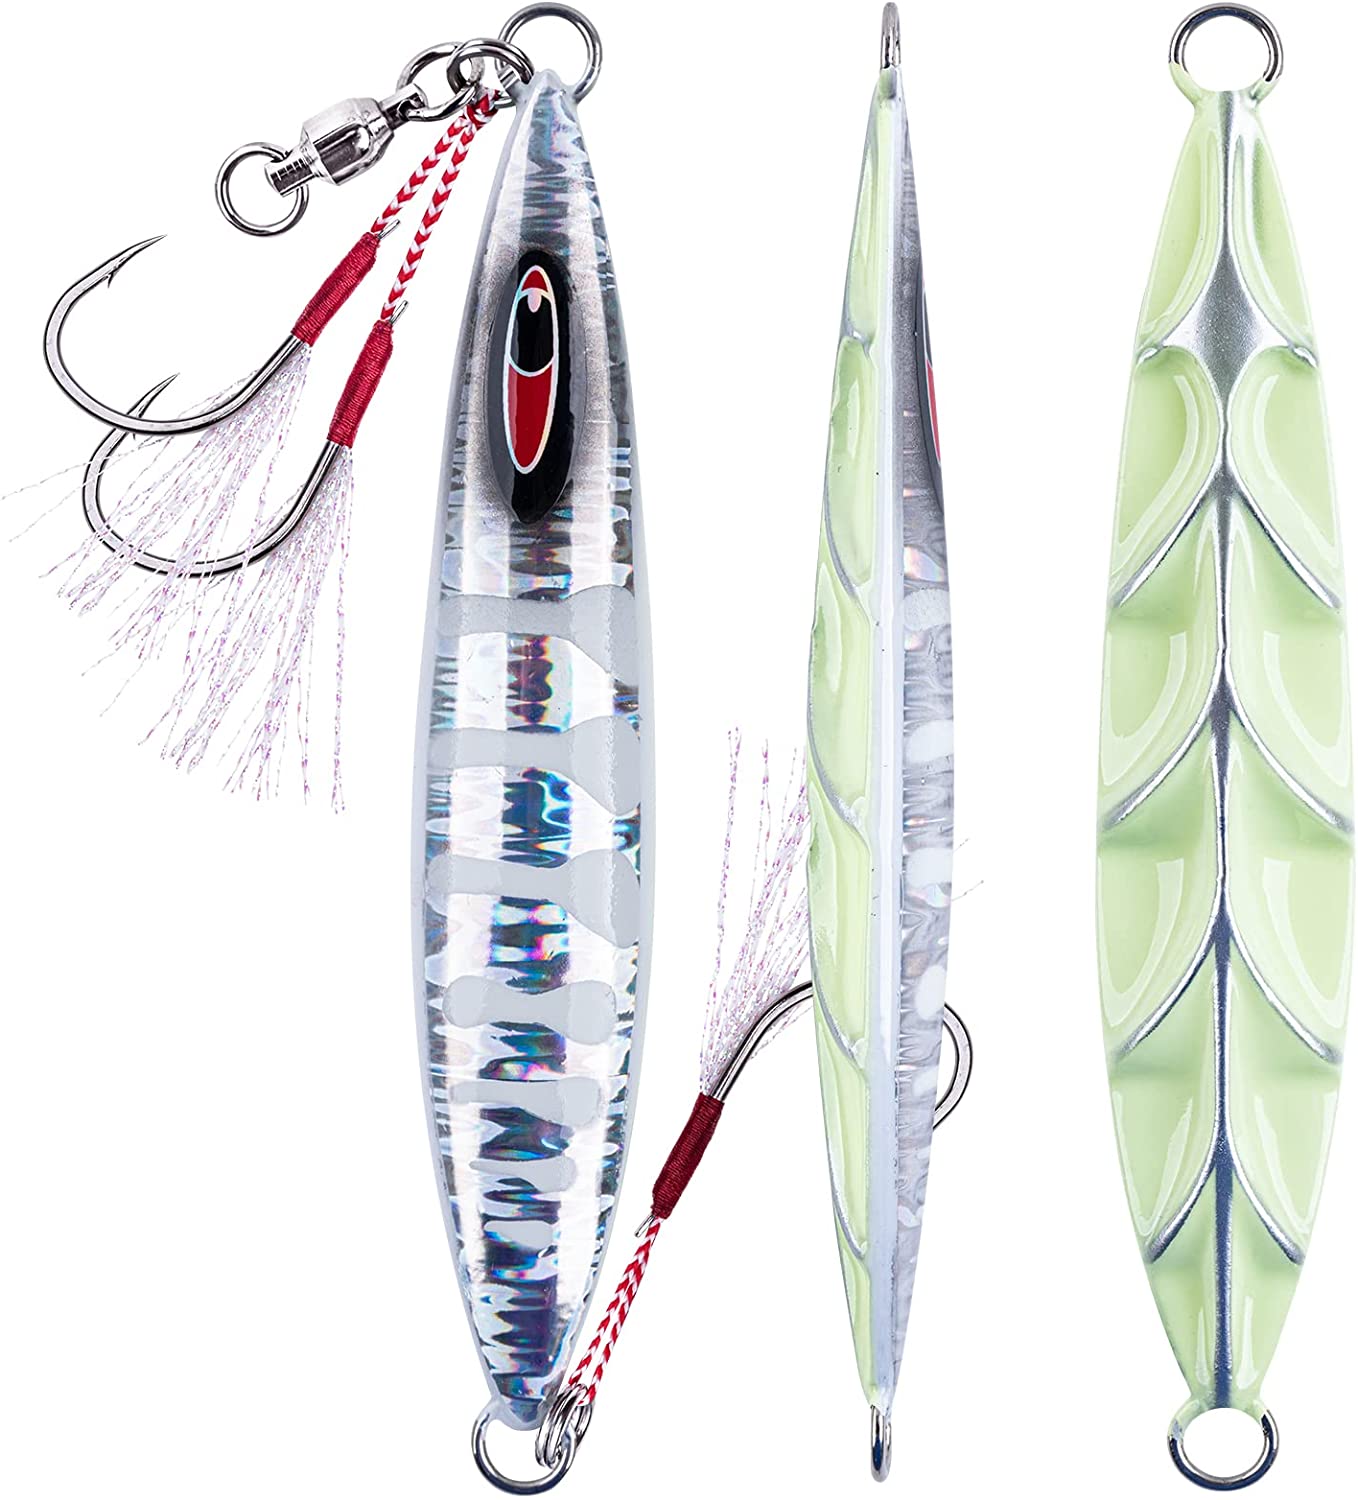 Goture Glow Slow Pitch Jigs Double Assist Hook Saltwater Lead Jigging Lures  with Portable Jig Bag – GOTURE